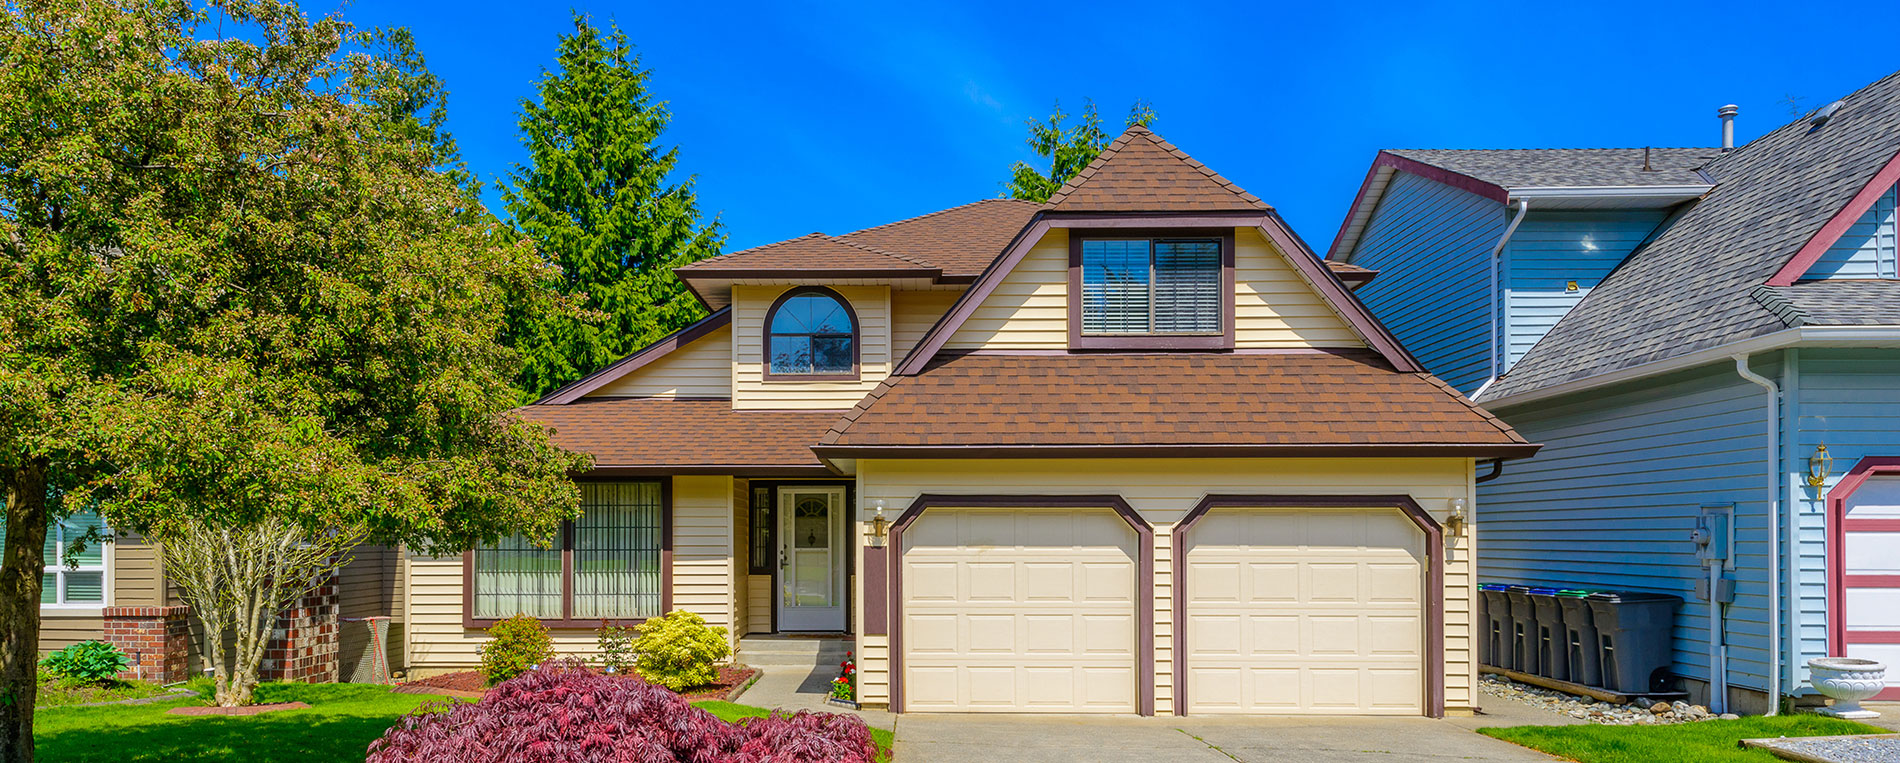 Garage Door Maintenance You Can Perform On Your Own